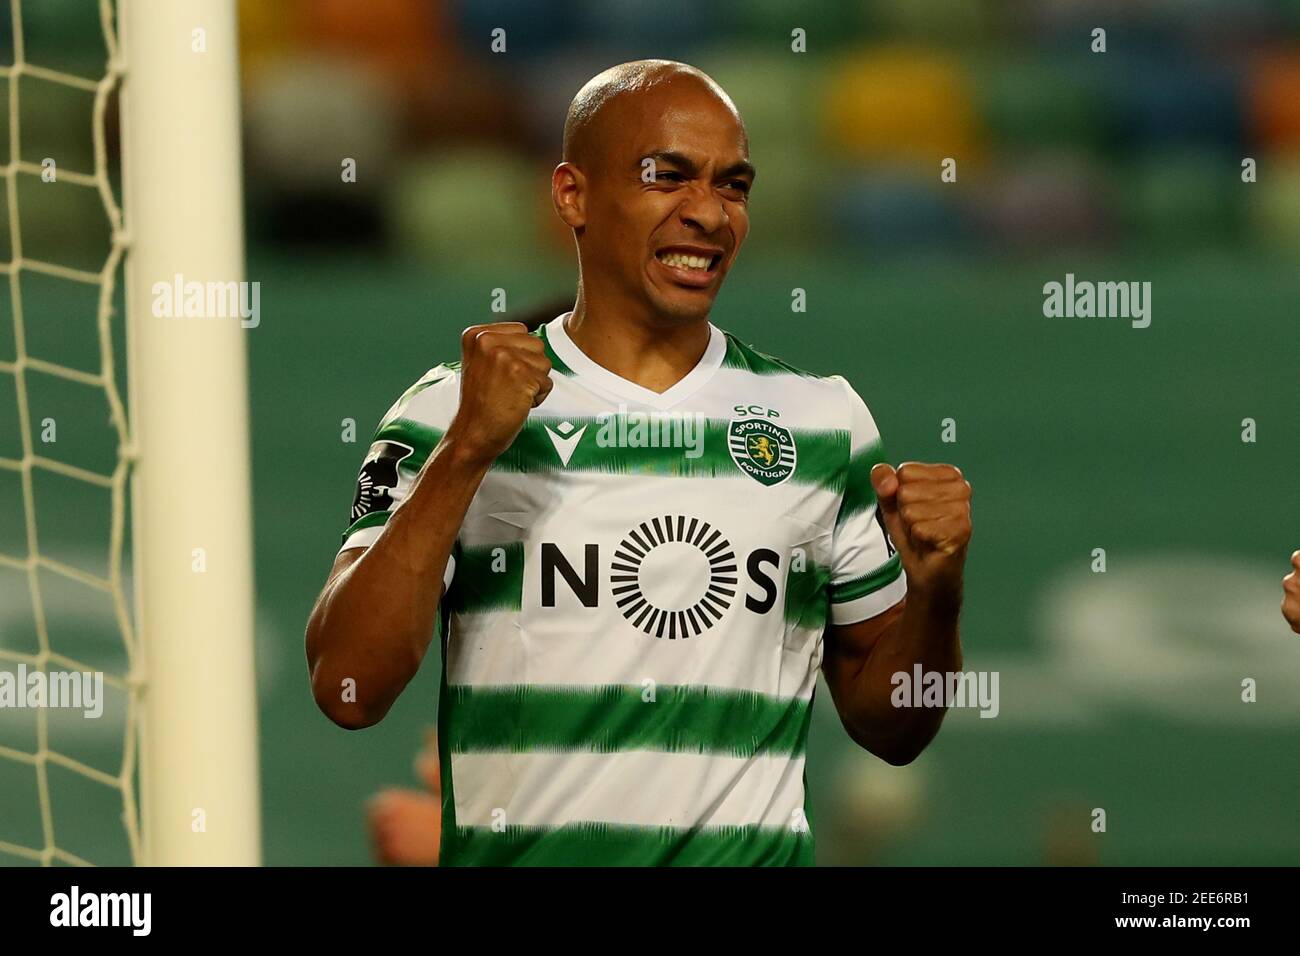 Lisbon, Portugal. 15th Feb, 2021. Joao Mario of Sporting CP celebrates after scoring a goal during the Portuguese League football match between Sporting CP and FC Pacos de Ferreira at Jose Alvalade stadium in Lisbon, Portugal on February 15, 2021. Credit: Pedro Fiuza/ZUMA Wire/Alamy Live News Stock Photo